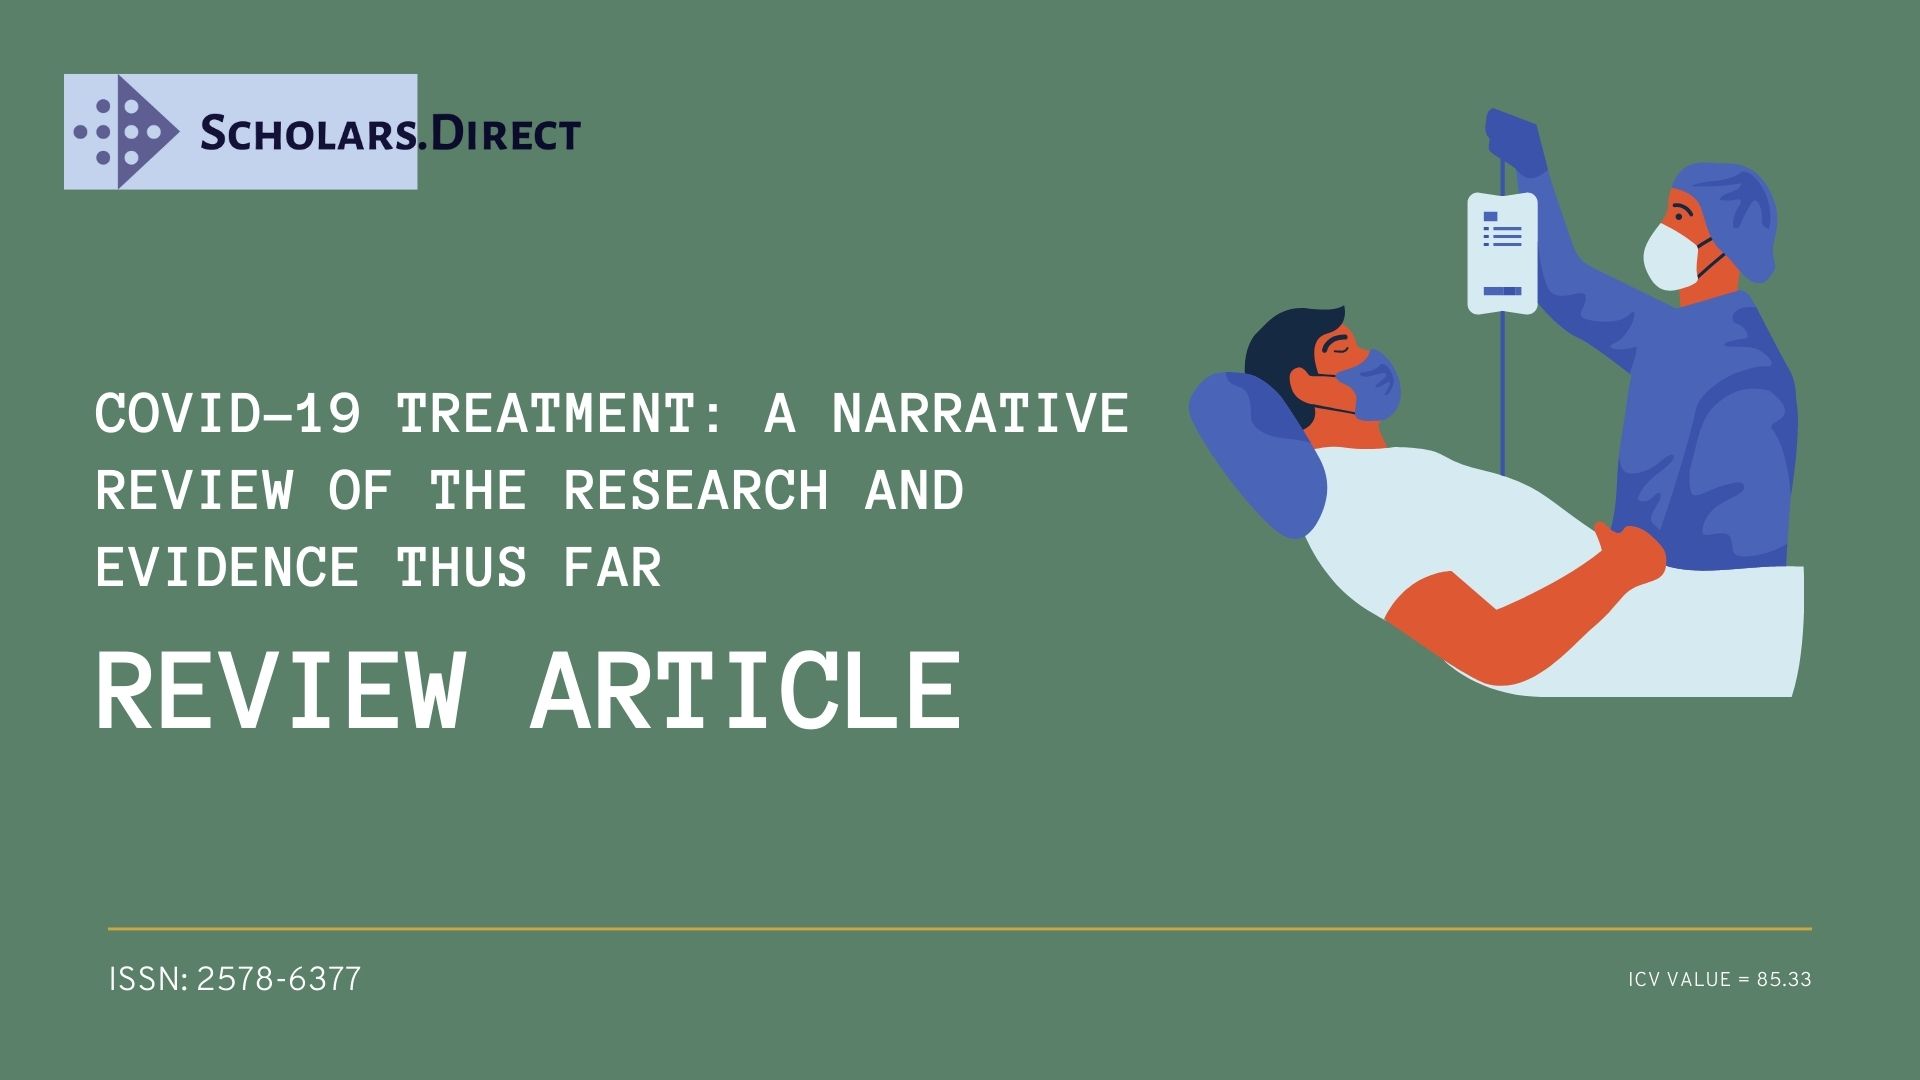 Journal of Covid-19 Treatment